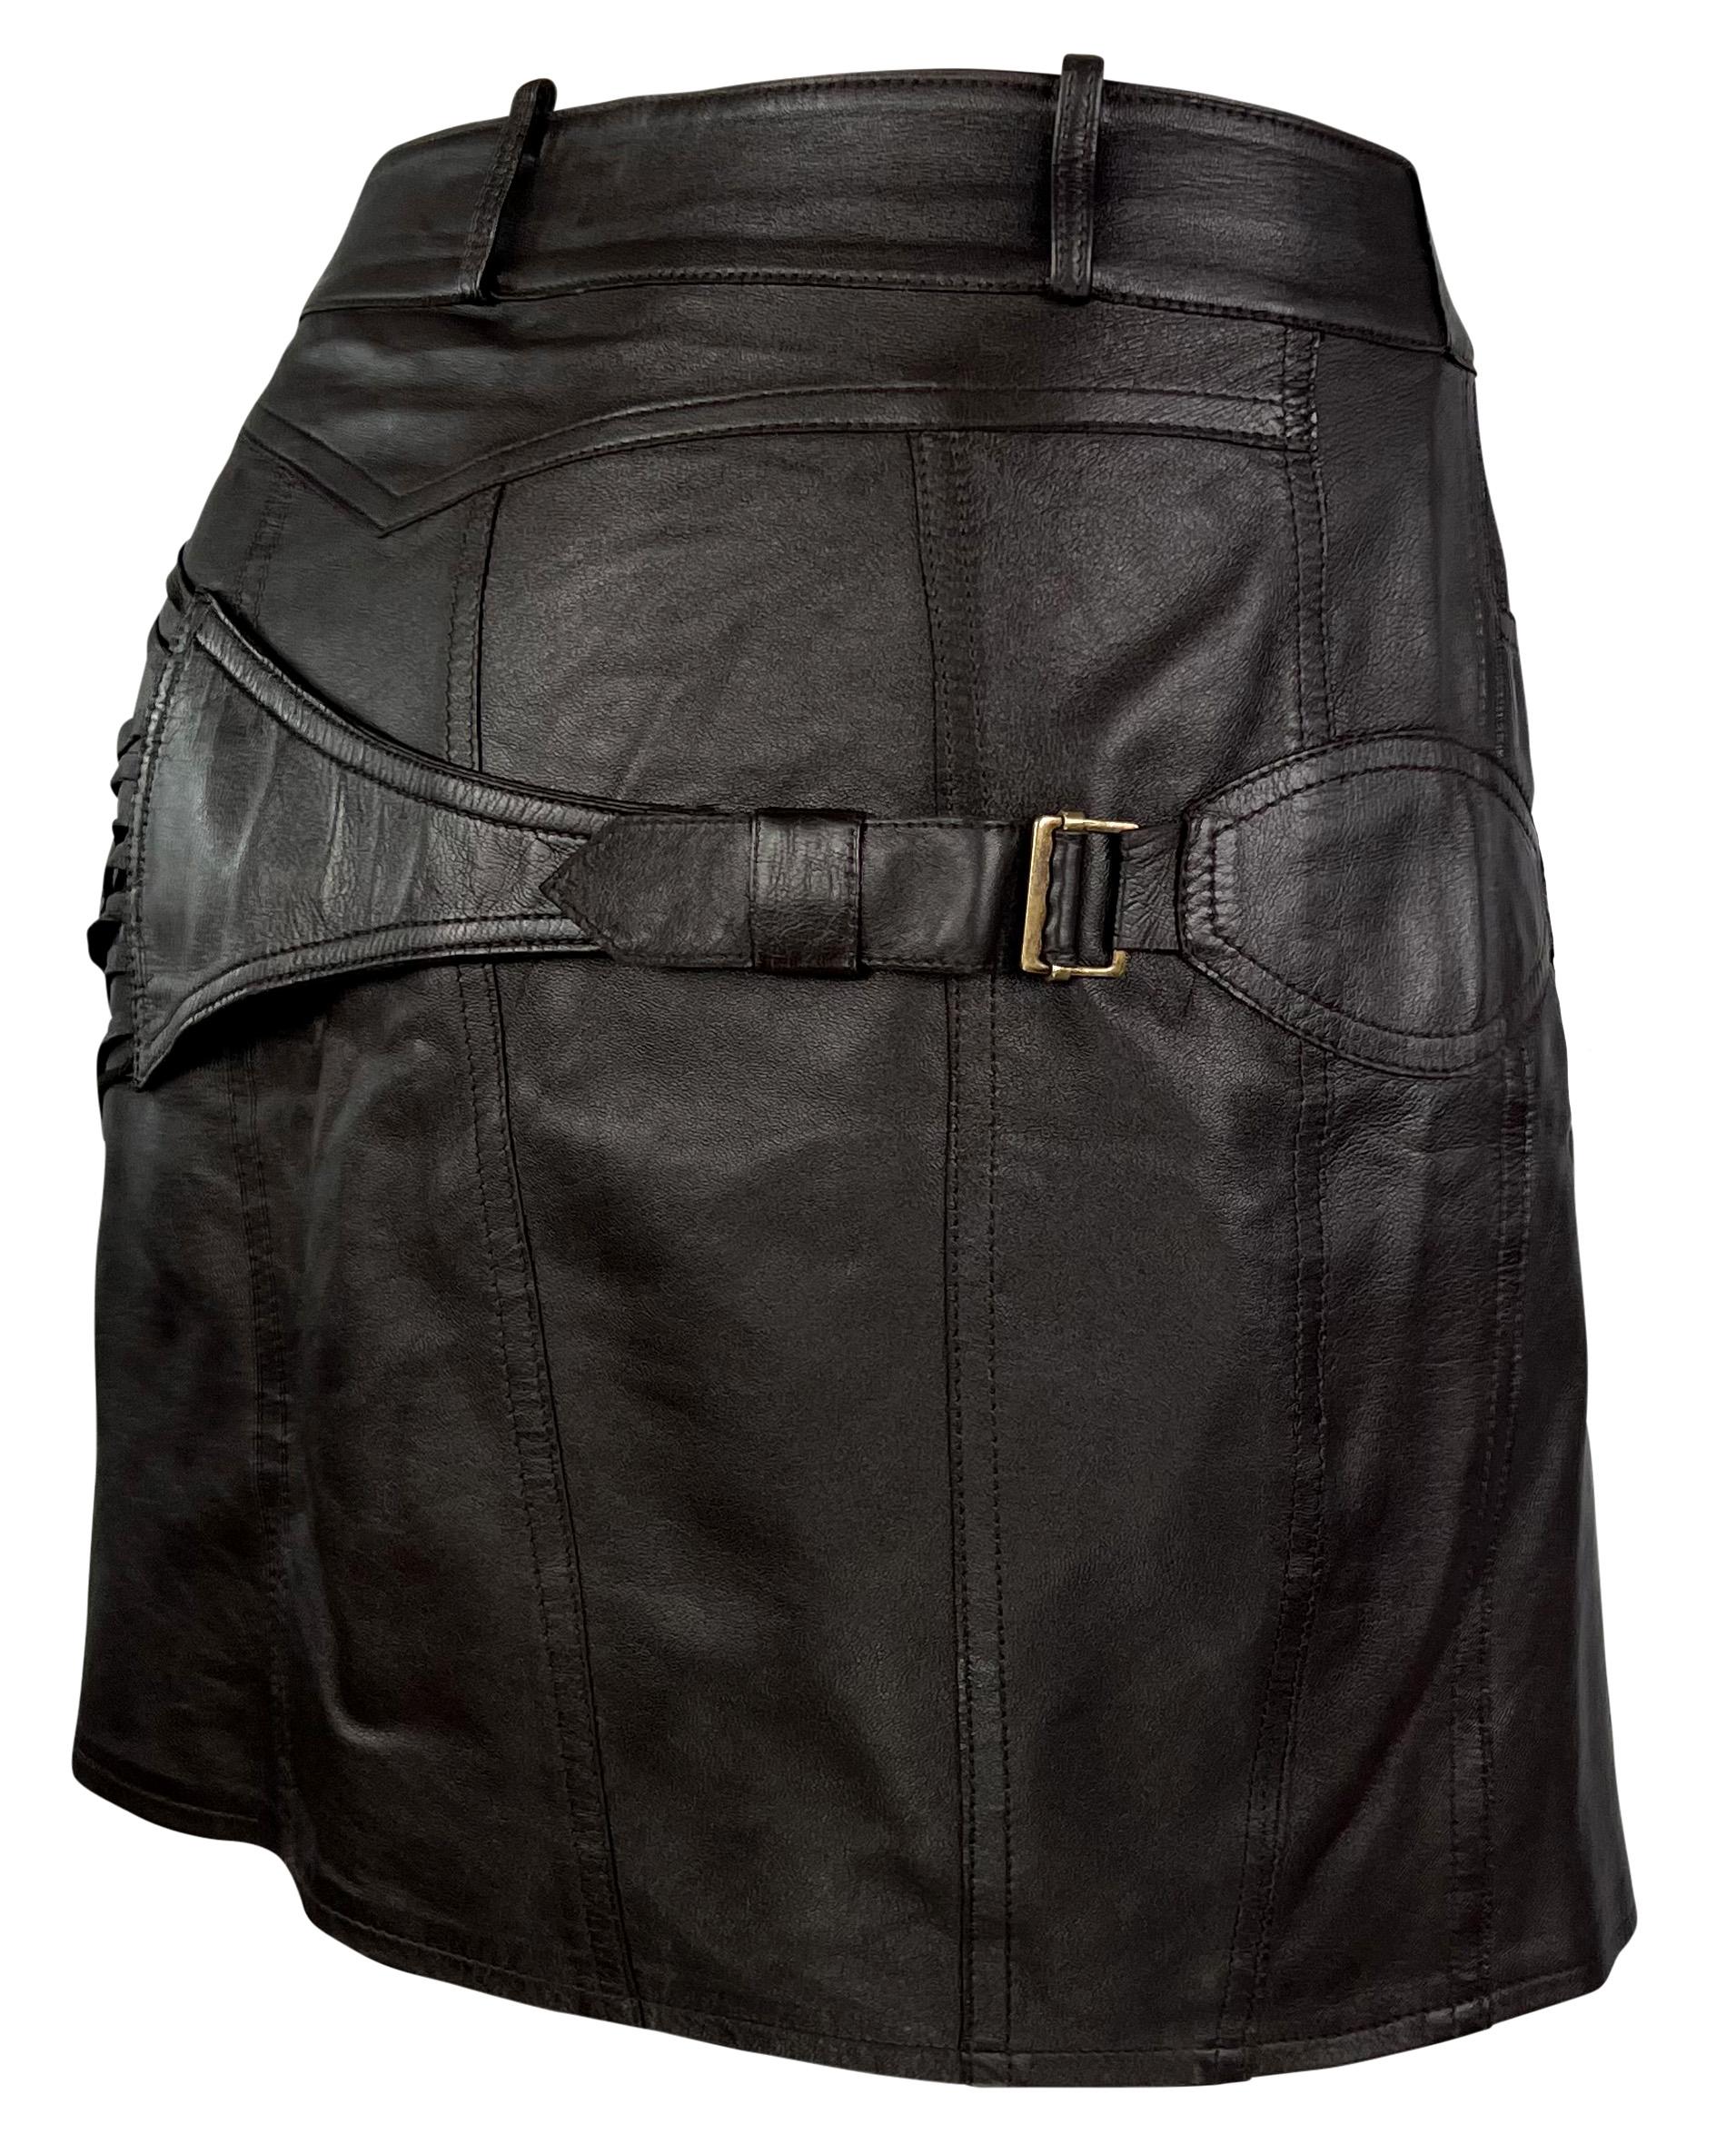 F/W 2002 Christian Dior by John Galliano Leather Lace-Up Asymmetric Mini Skirt For Sale 3